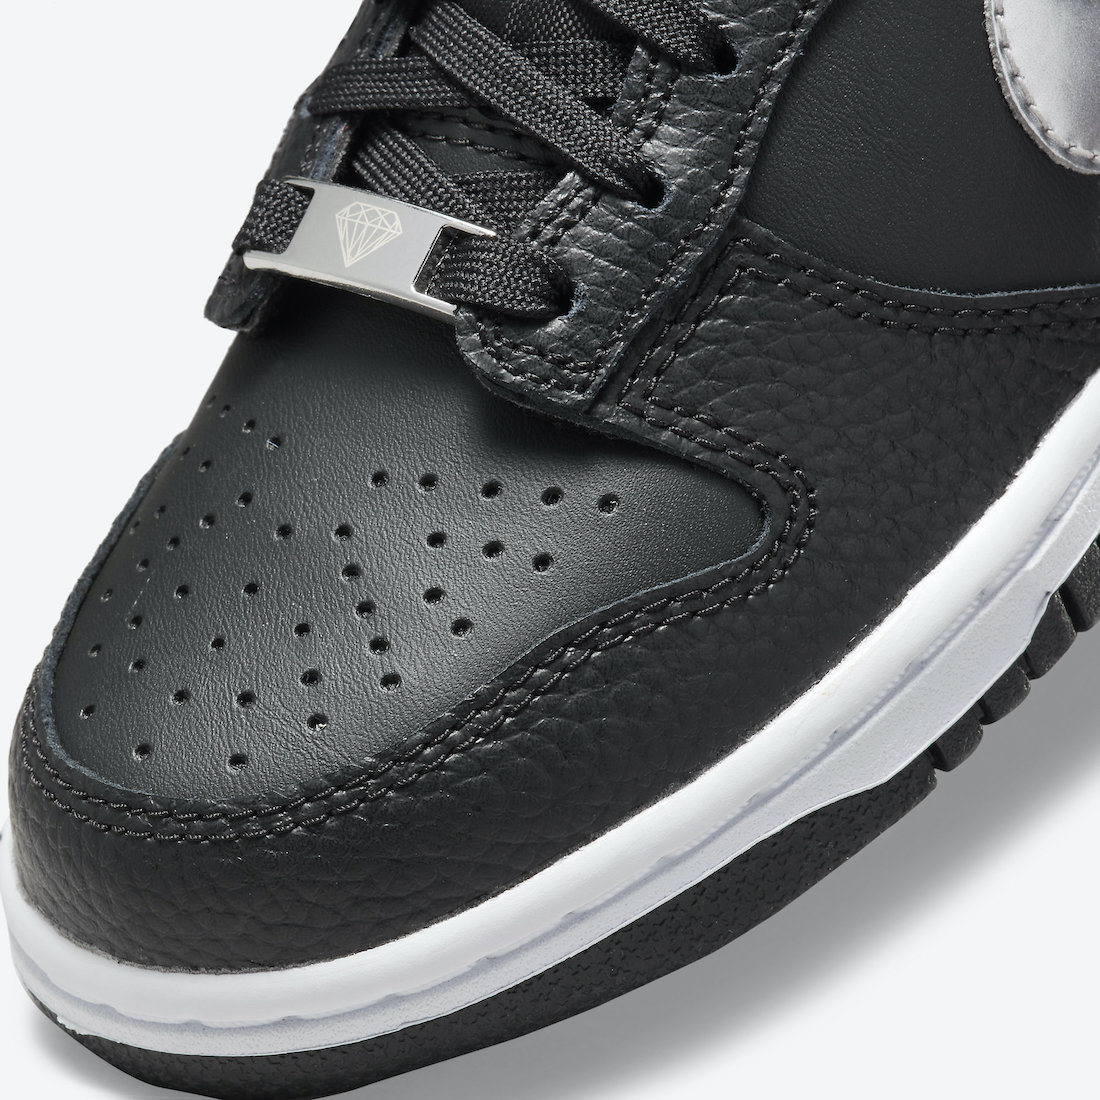 Nike Dunk Low GS Black Sliver DC9560-001 Release Date